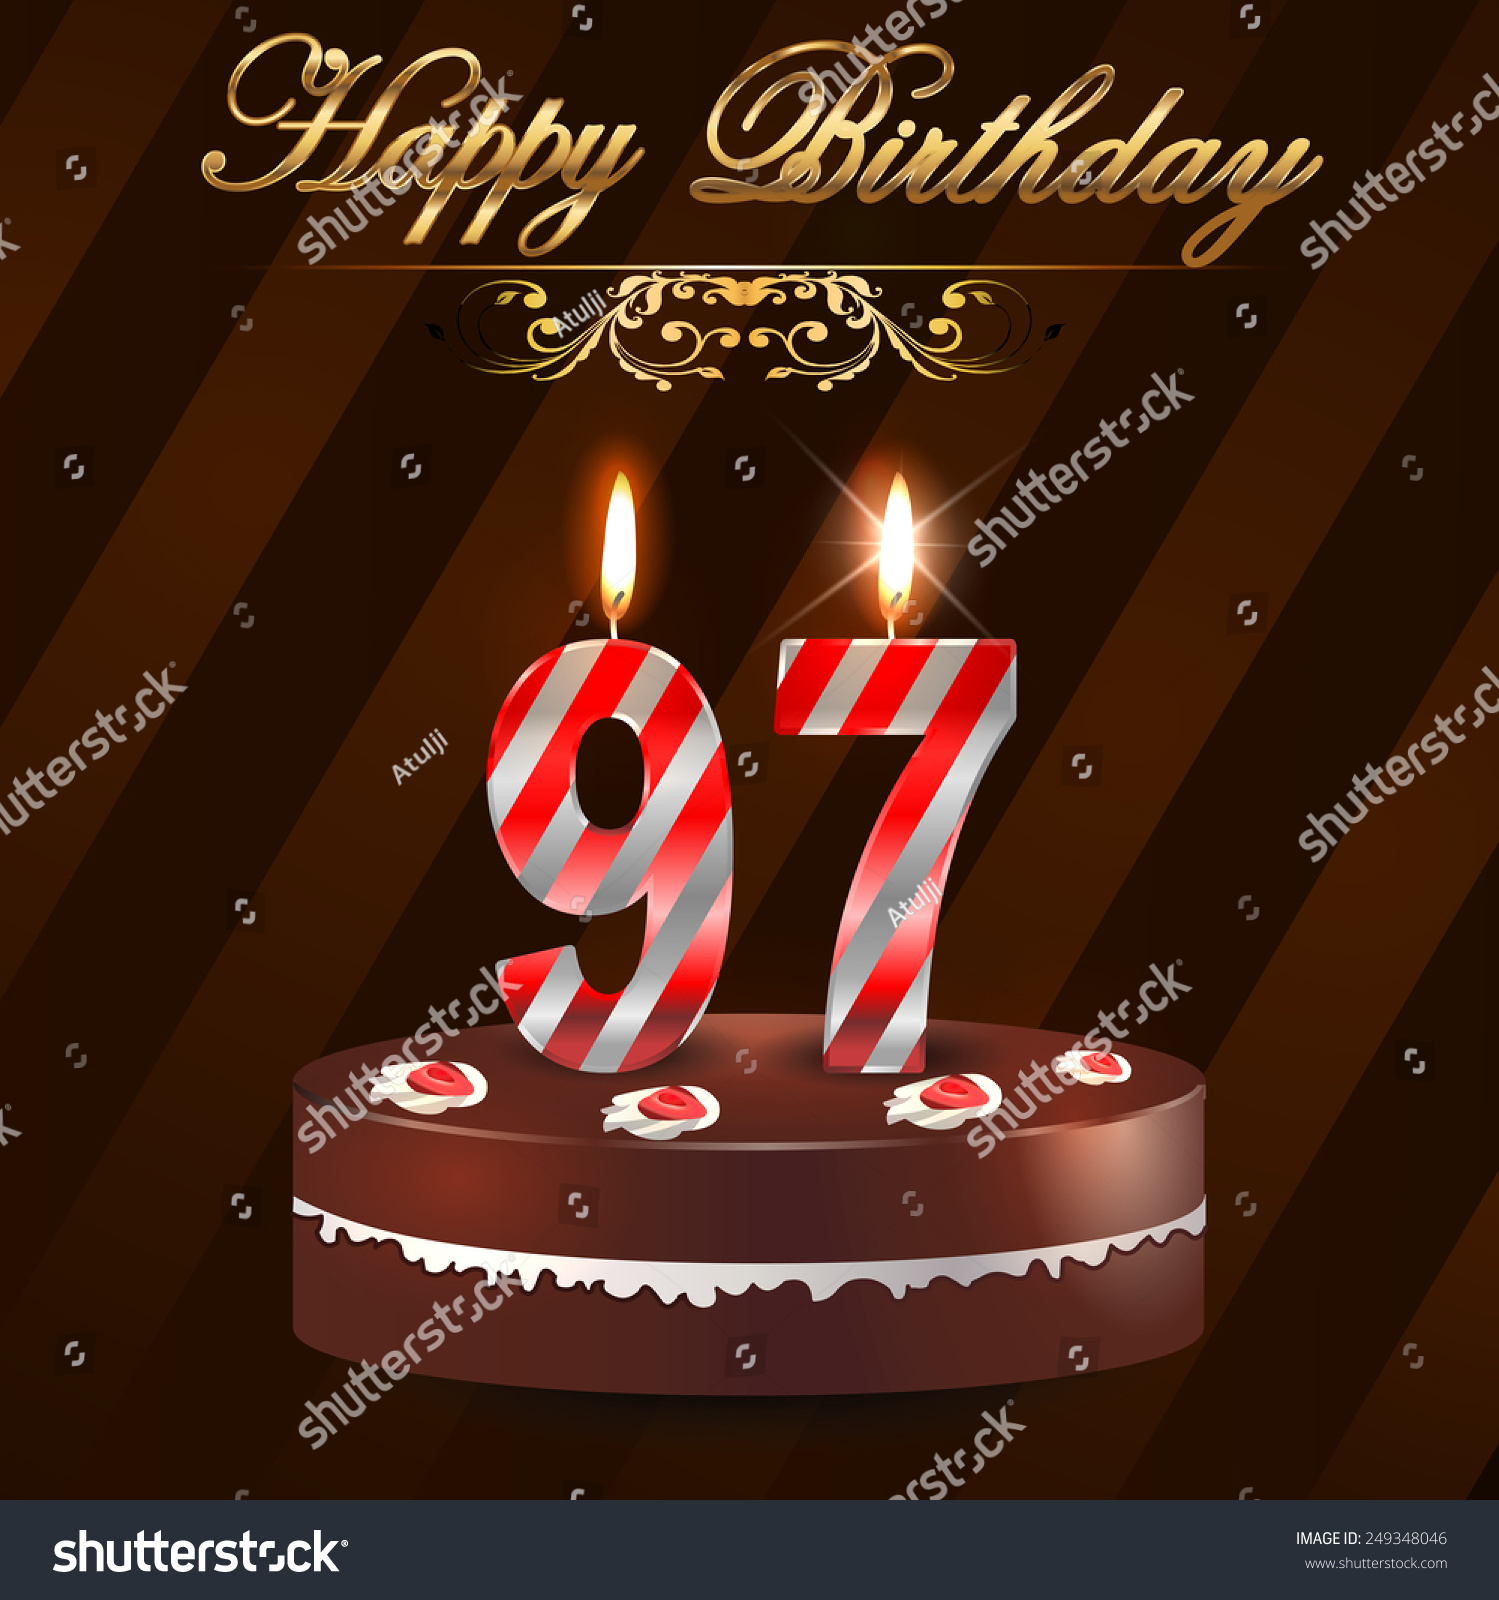 https://image.shutterstock.com/z/stock-vector--year-happy-birthday-card-with-cake-and-candles-th-birthday-vector-eps-249348046.jpg